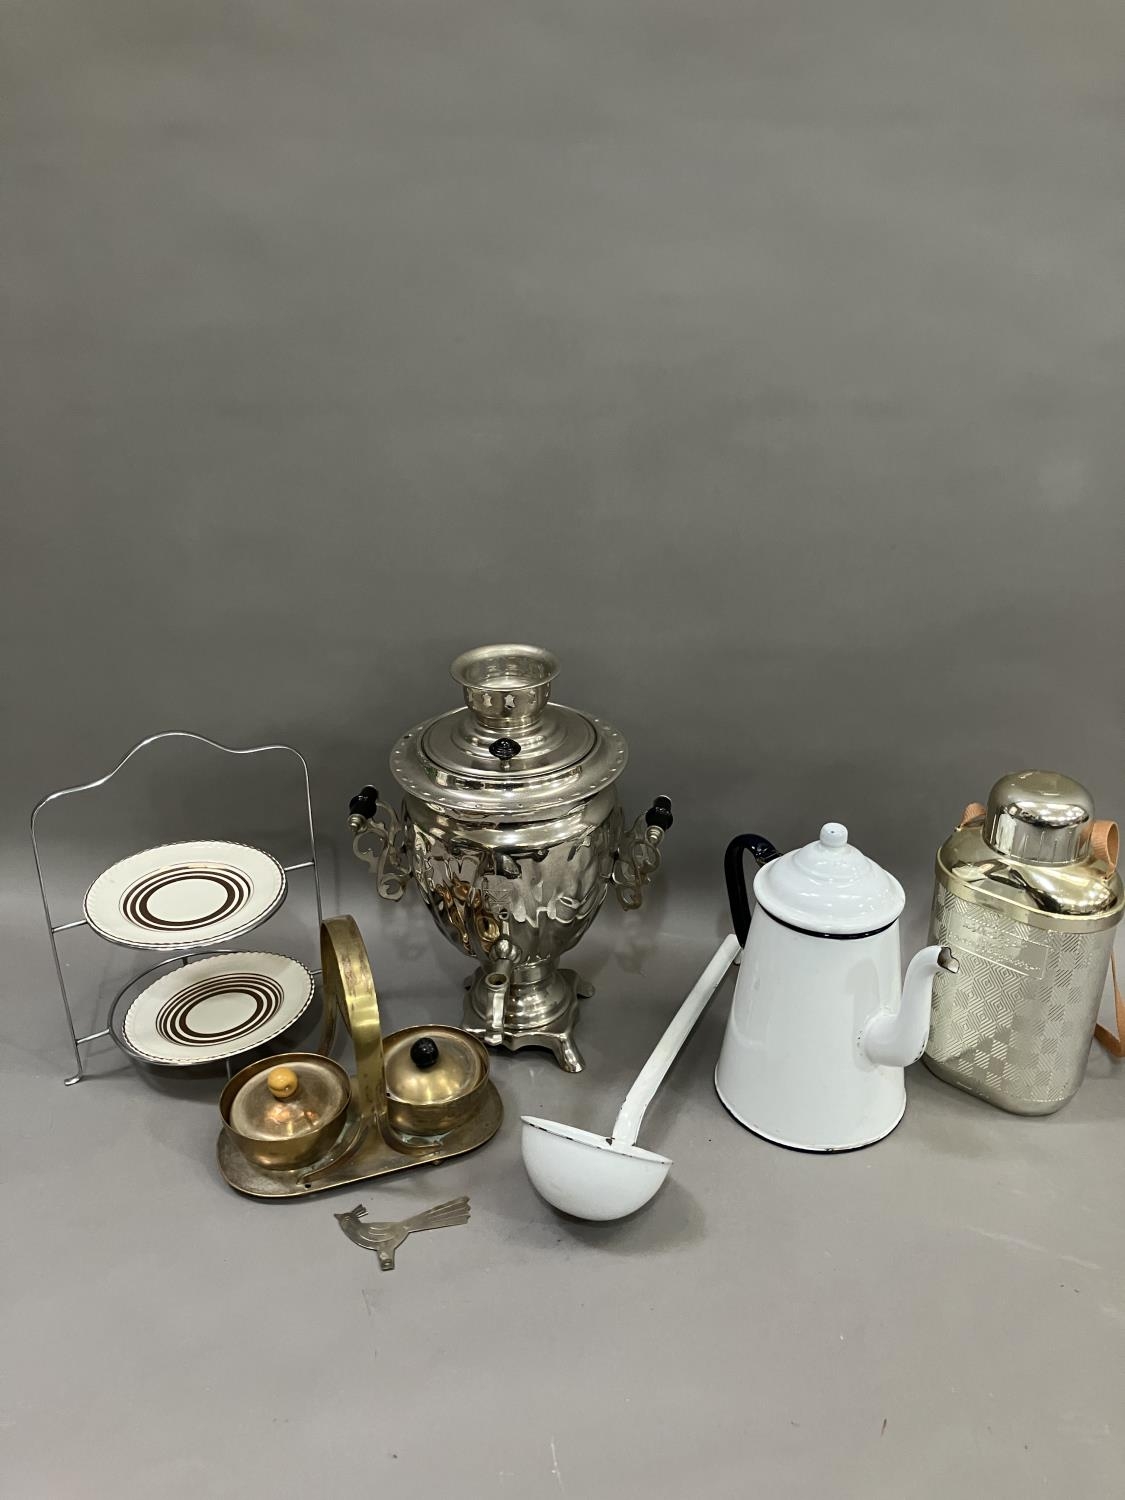 A collection of vintage kitchenalia including an enamel ware coffee pot, enamel ware ladle, silver